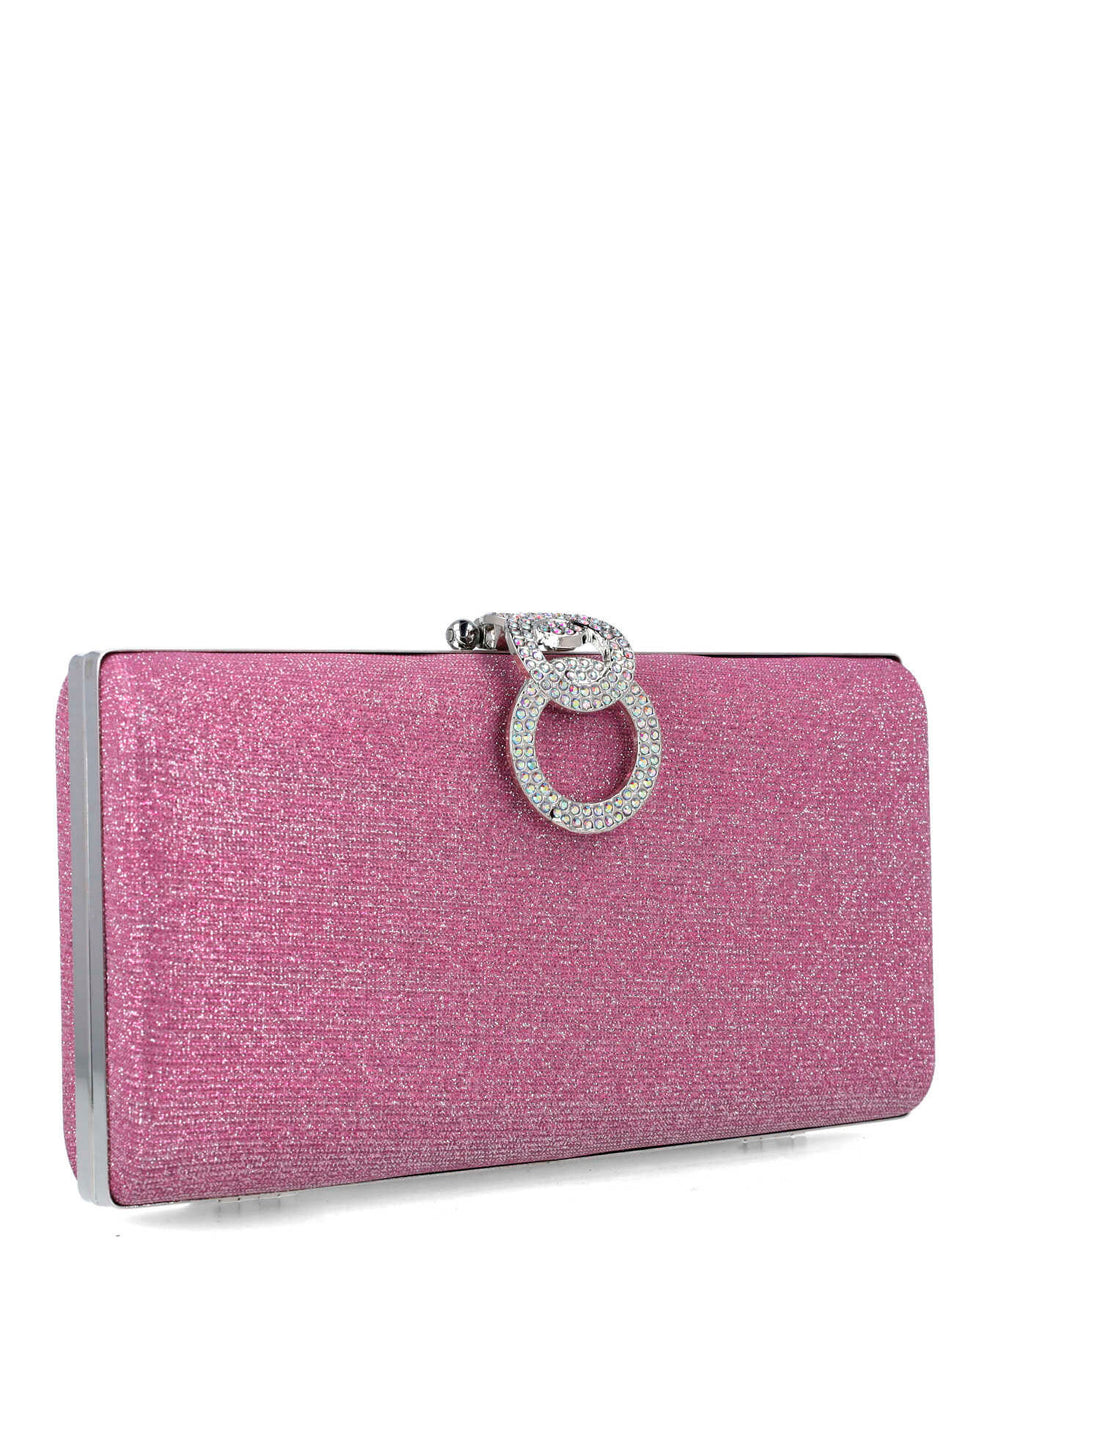 Shimmery Clutch With Embellished Hardware_85479_03_02